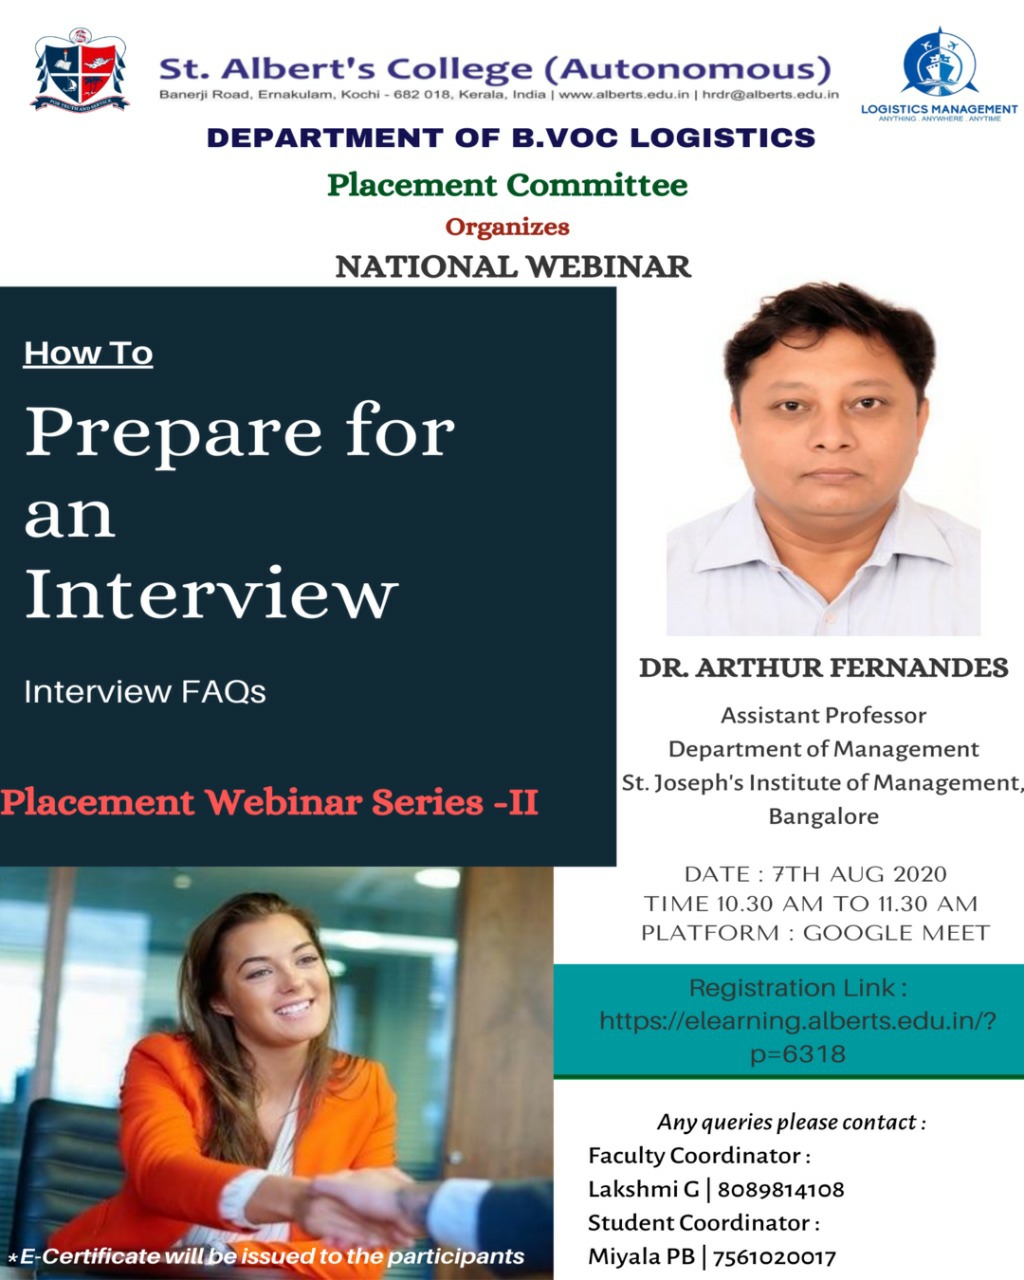 Webinar on How to Prepare for an Interview FAQs